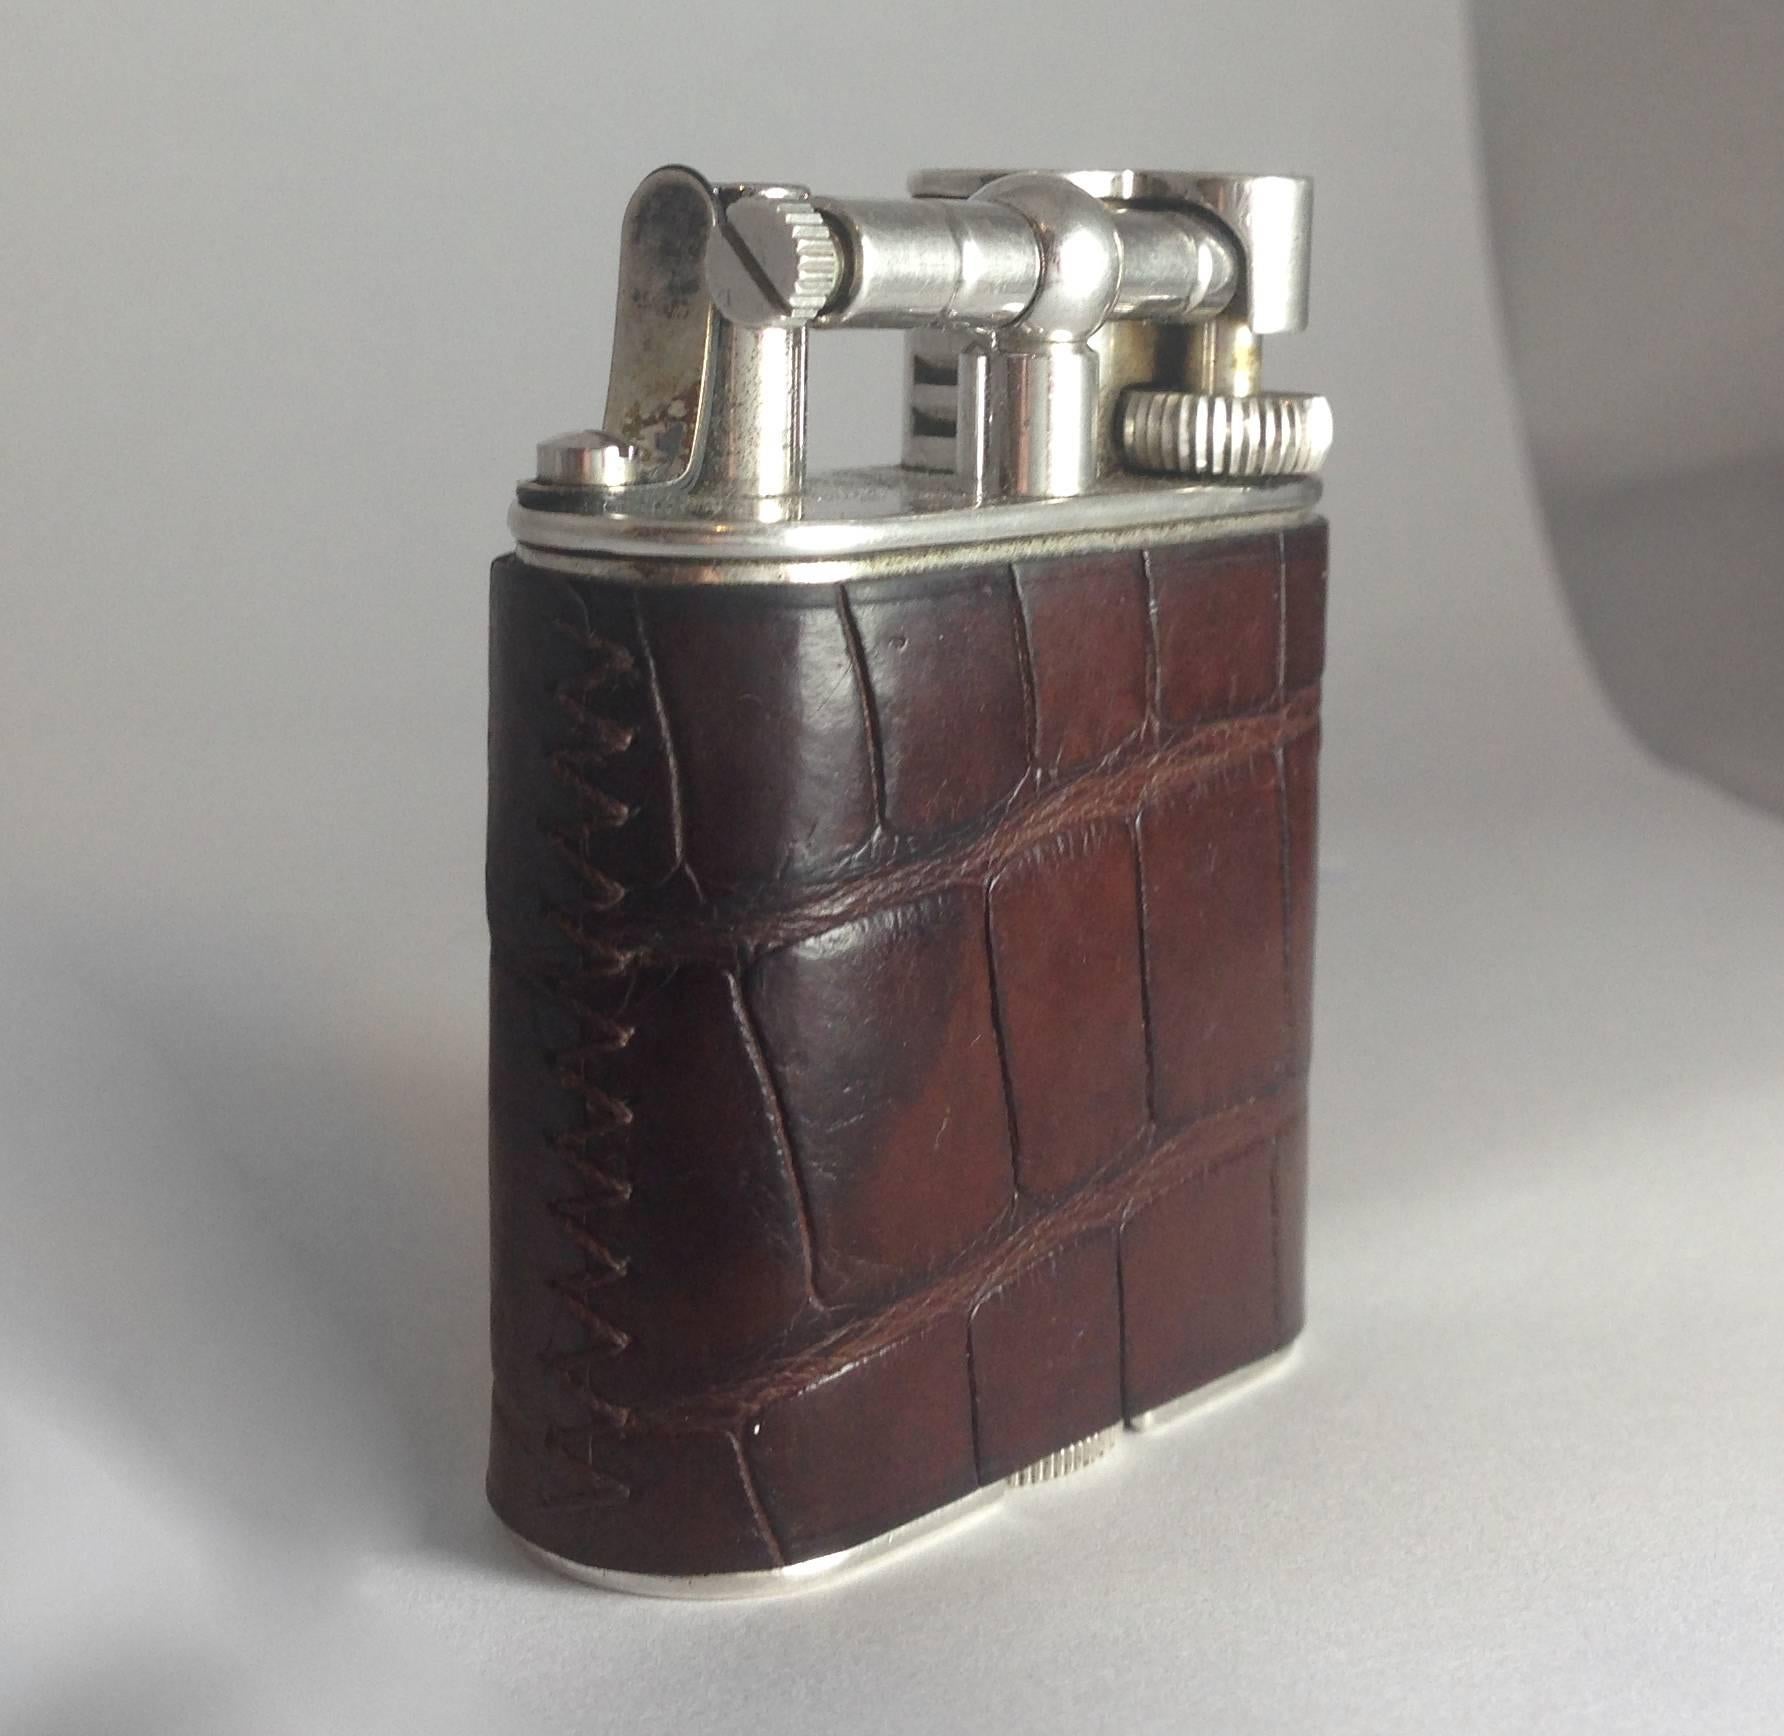 Dunhill lighter 20850 made of metal and crocodile leather.